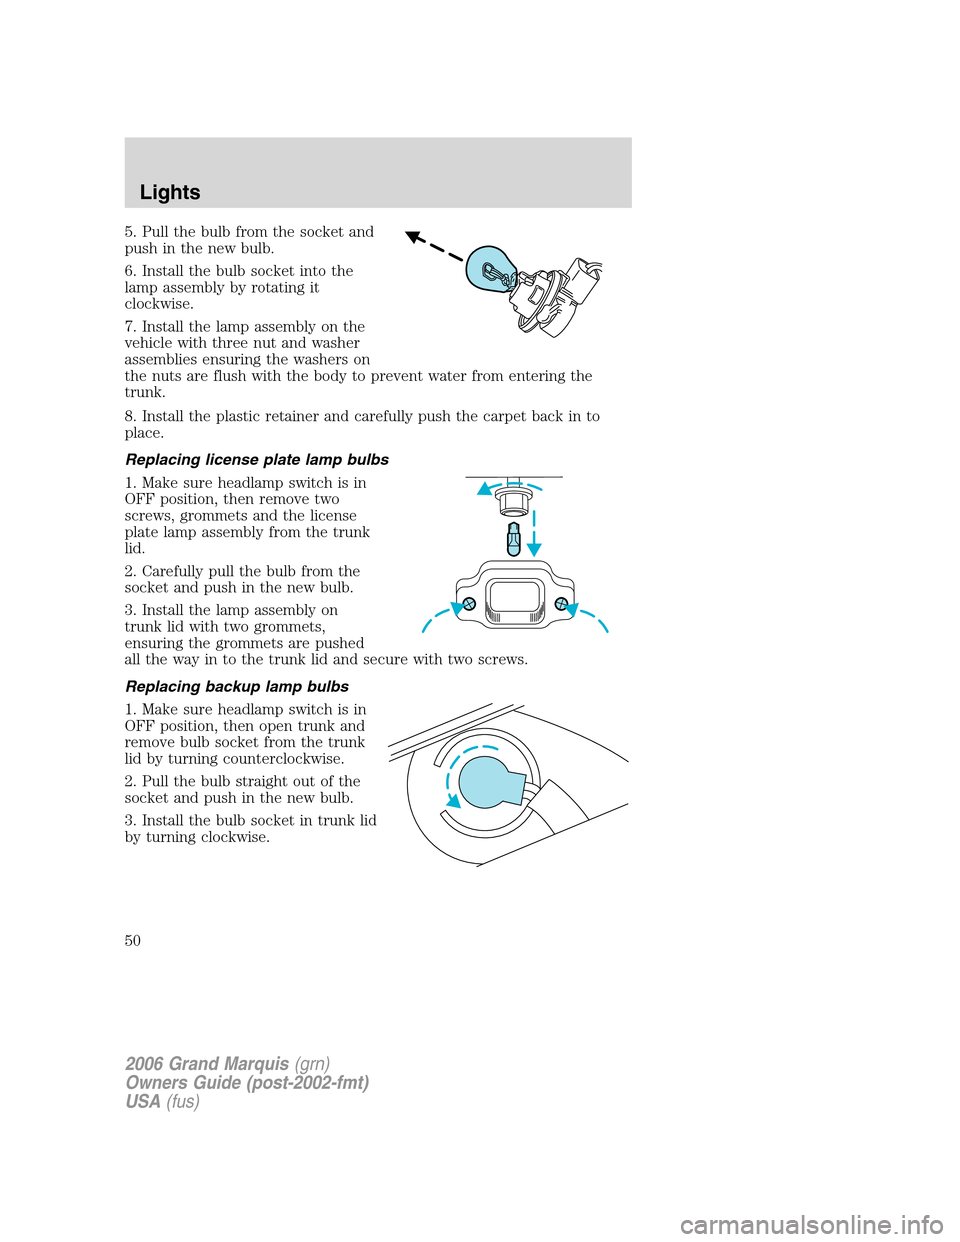 Mercury Grand Marquis 2006  s Service Manual 5. Pull the bulb from the socket and
push in the new bulb.
6. Install the bulb socket into the
lamp assembly by rotating it
clockwise.
7. Install the lamp assembly on the
vehicle with three nut and wa